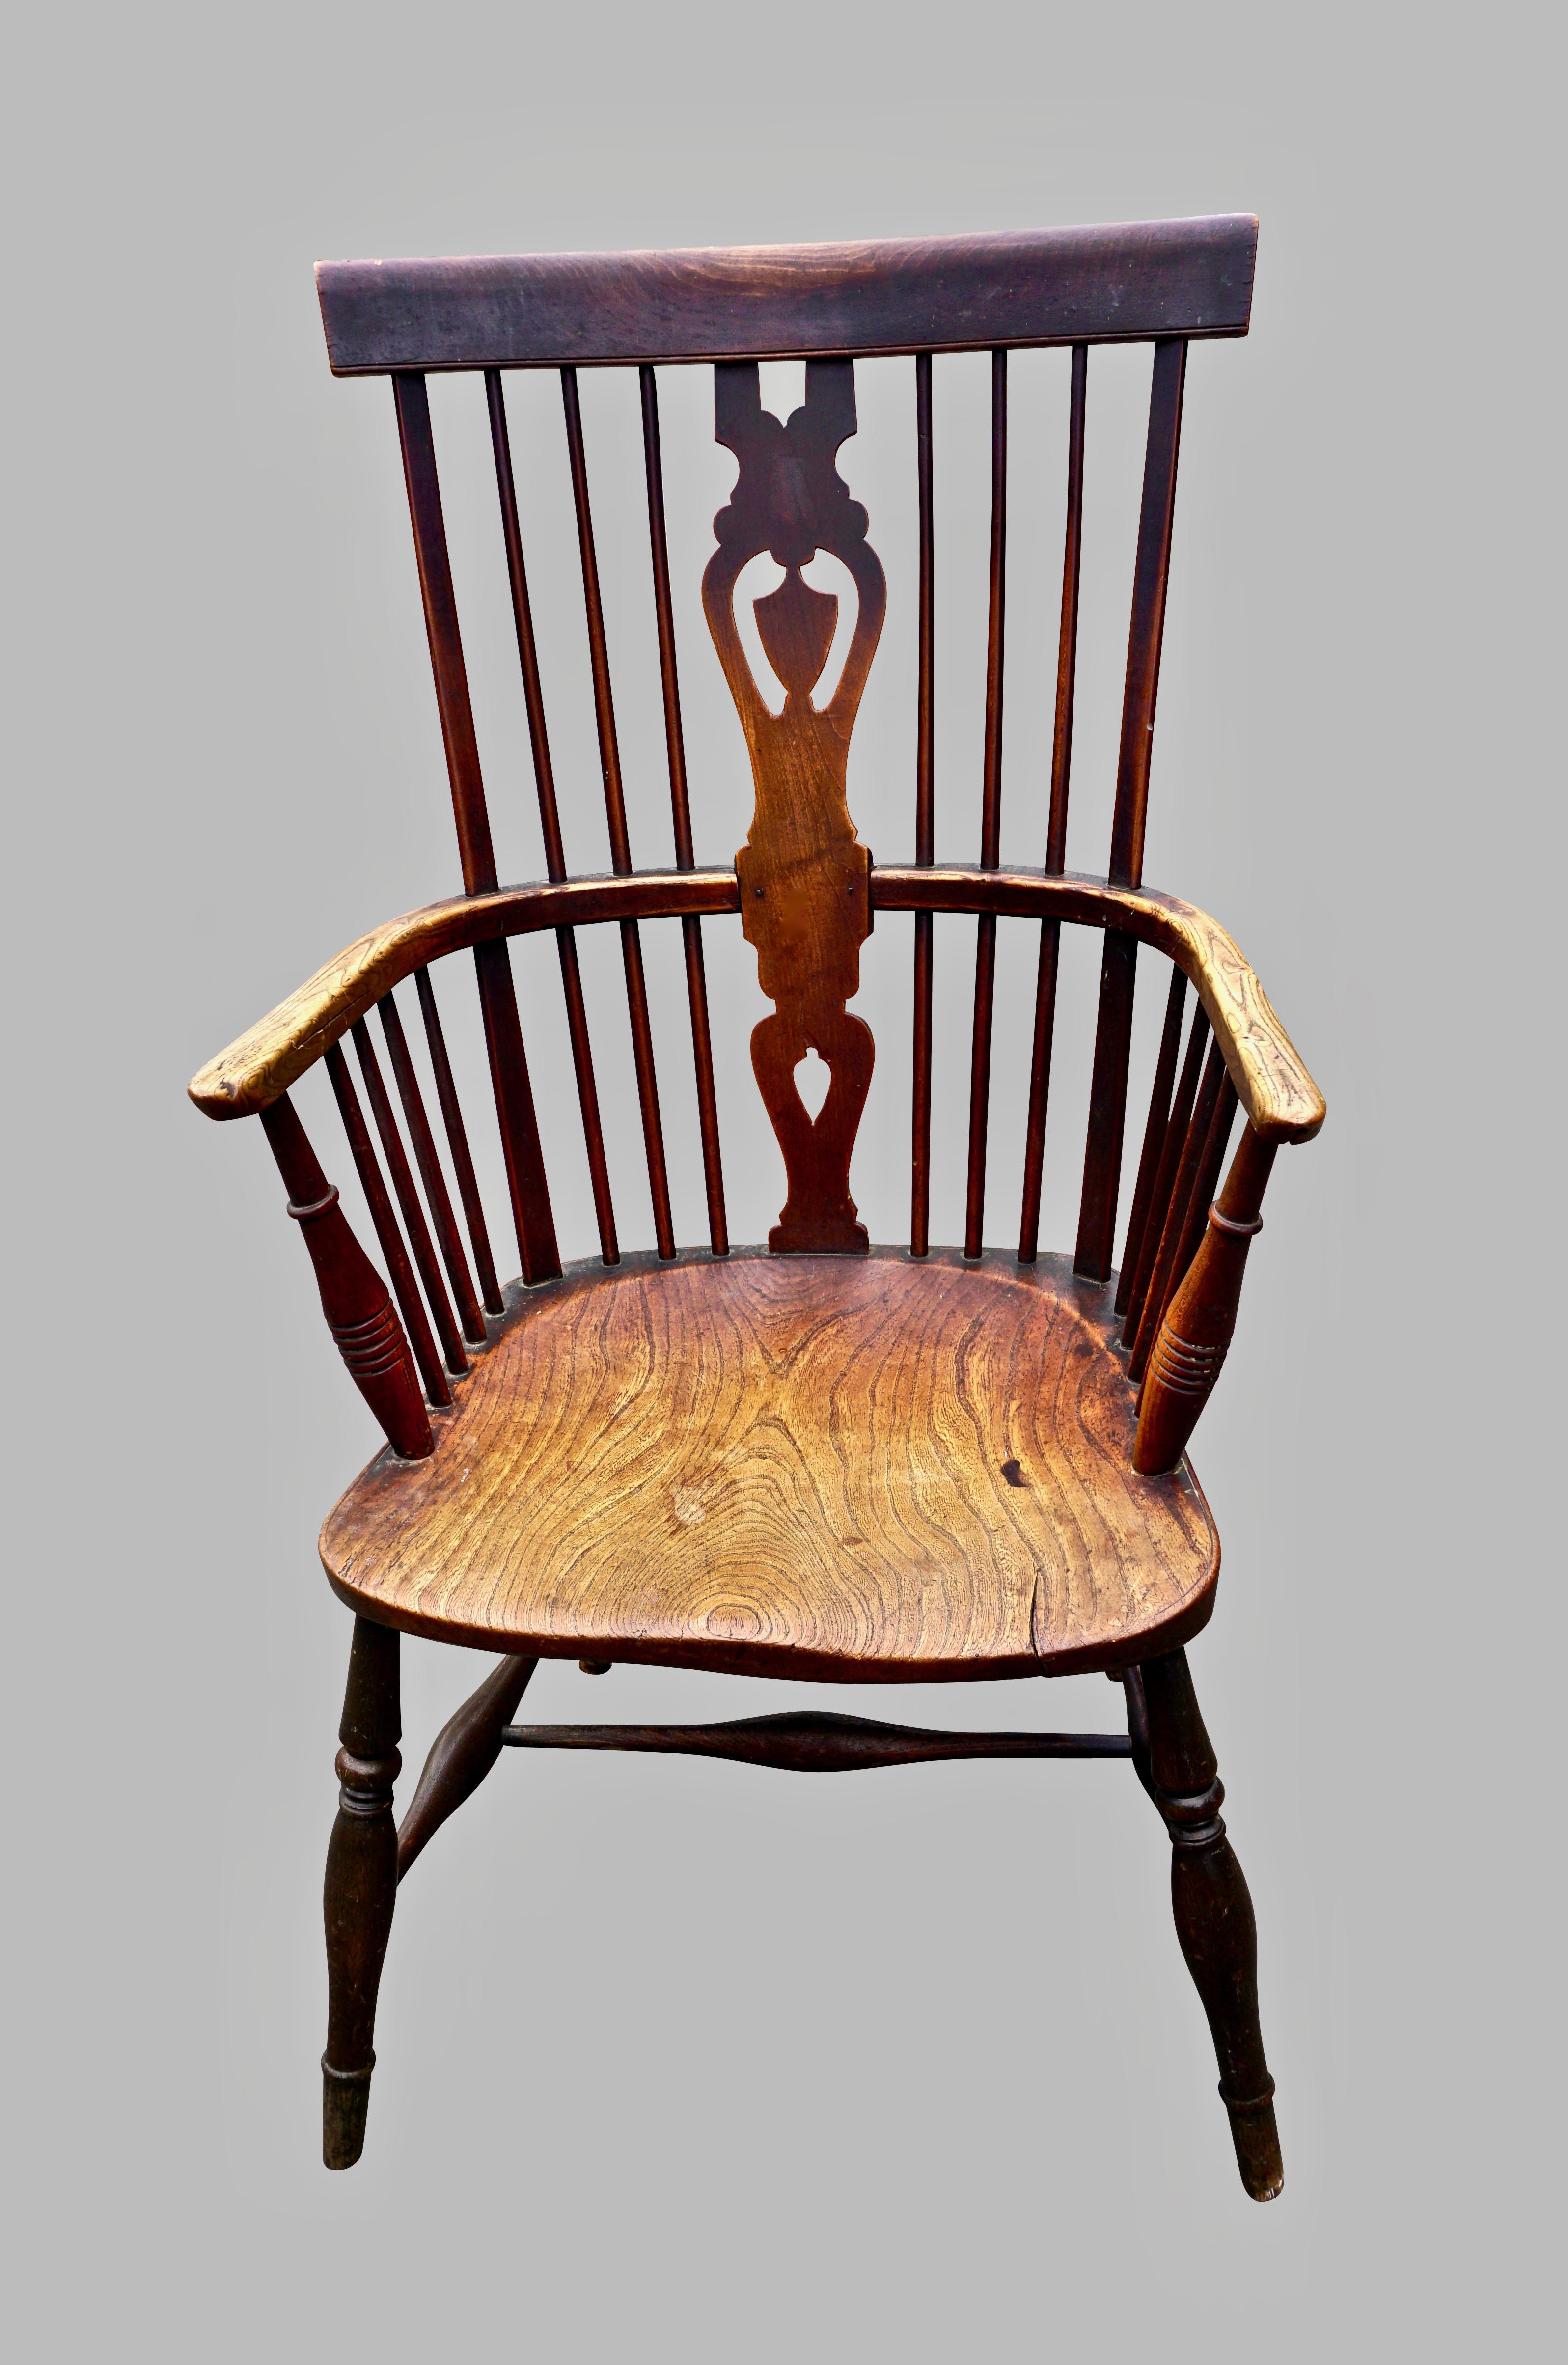 An English Thames Valley Windsor armchair of typical form with a pieced vasiform central splat terminating at the curved crest rail, the elm saddle seat supported on turned legs jointed by a single stretcher. Retains a crusty original surface that